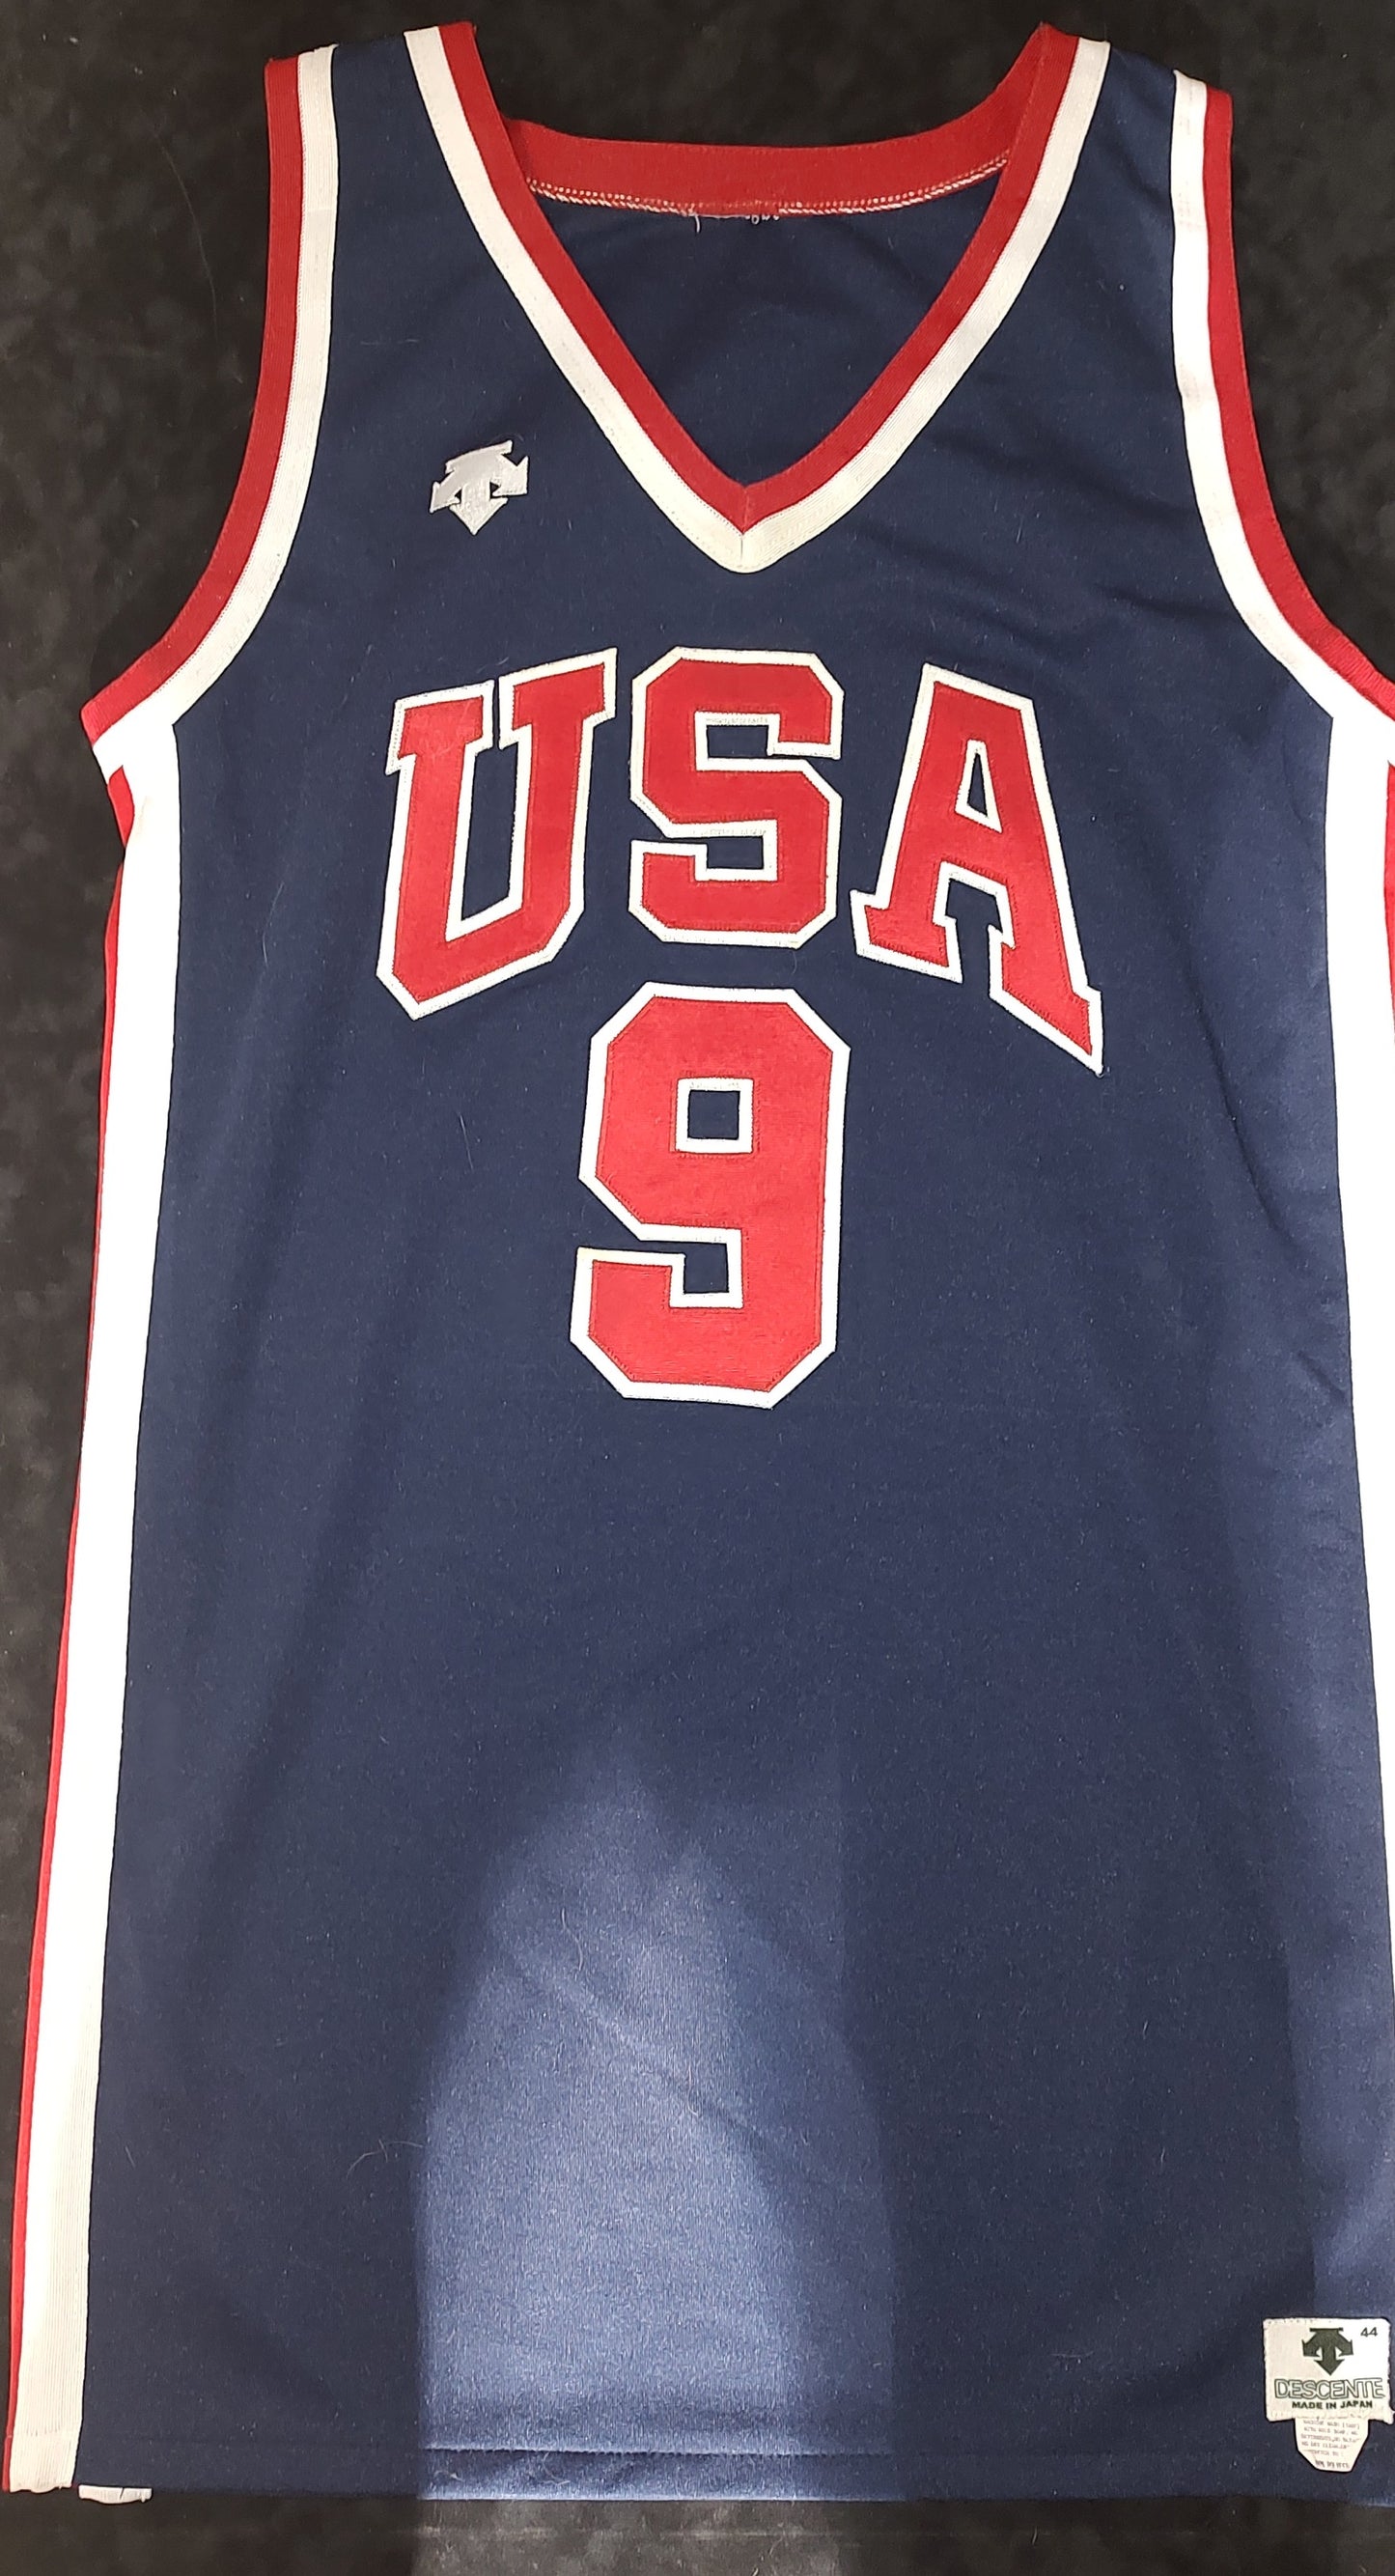 Michael Jordan UDA Upper Deck Authenticated Signed 1984 Olympic USA Blue Descente Jersey